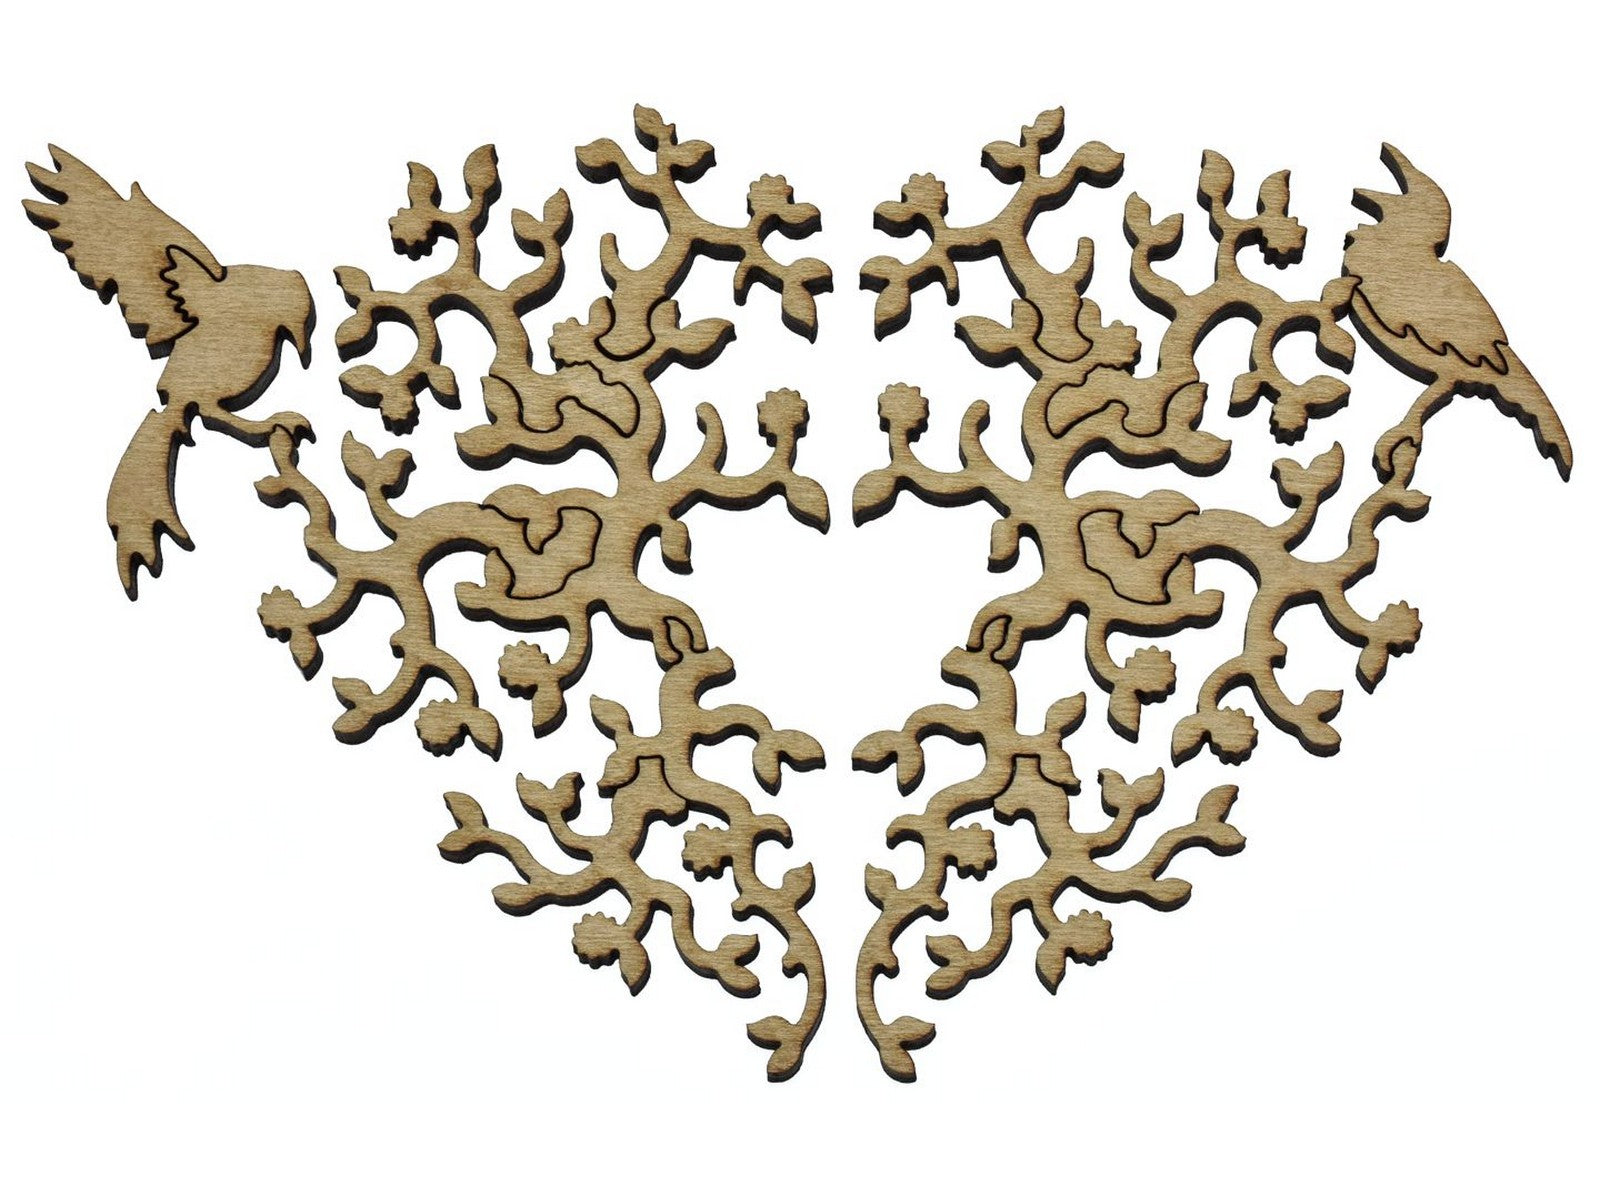 A closeup of pieces that form a heart made out of vines and two birds.